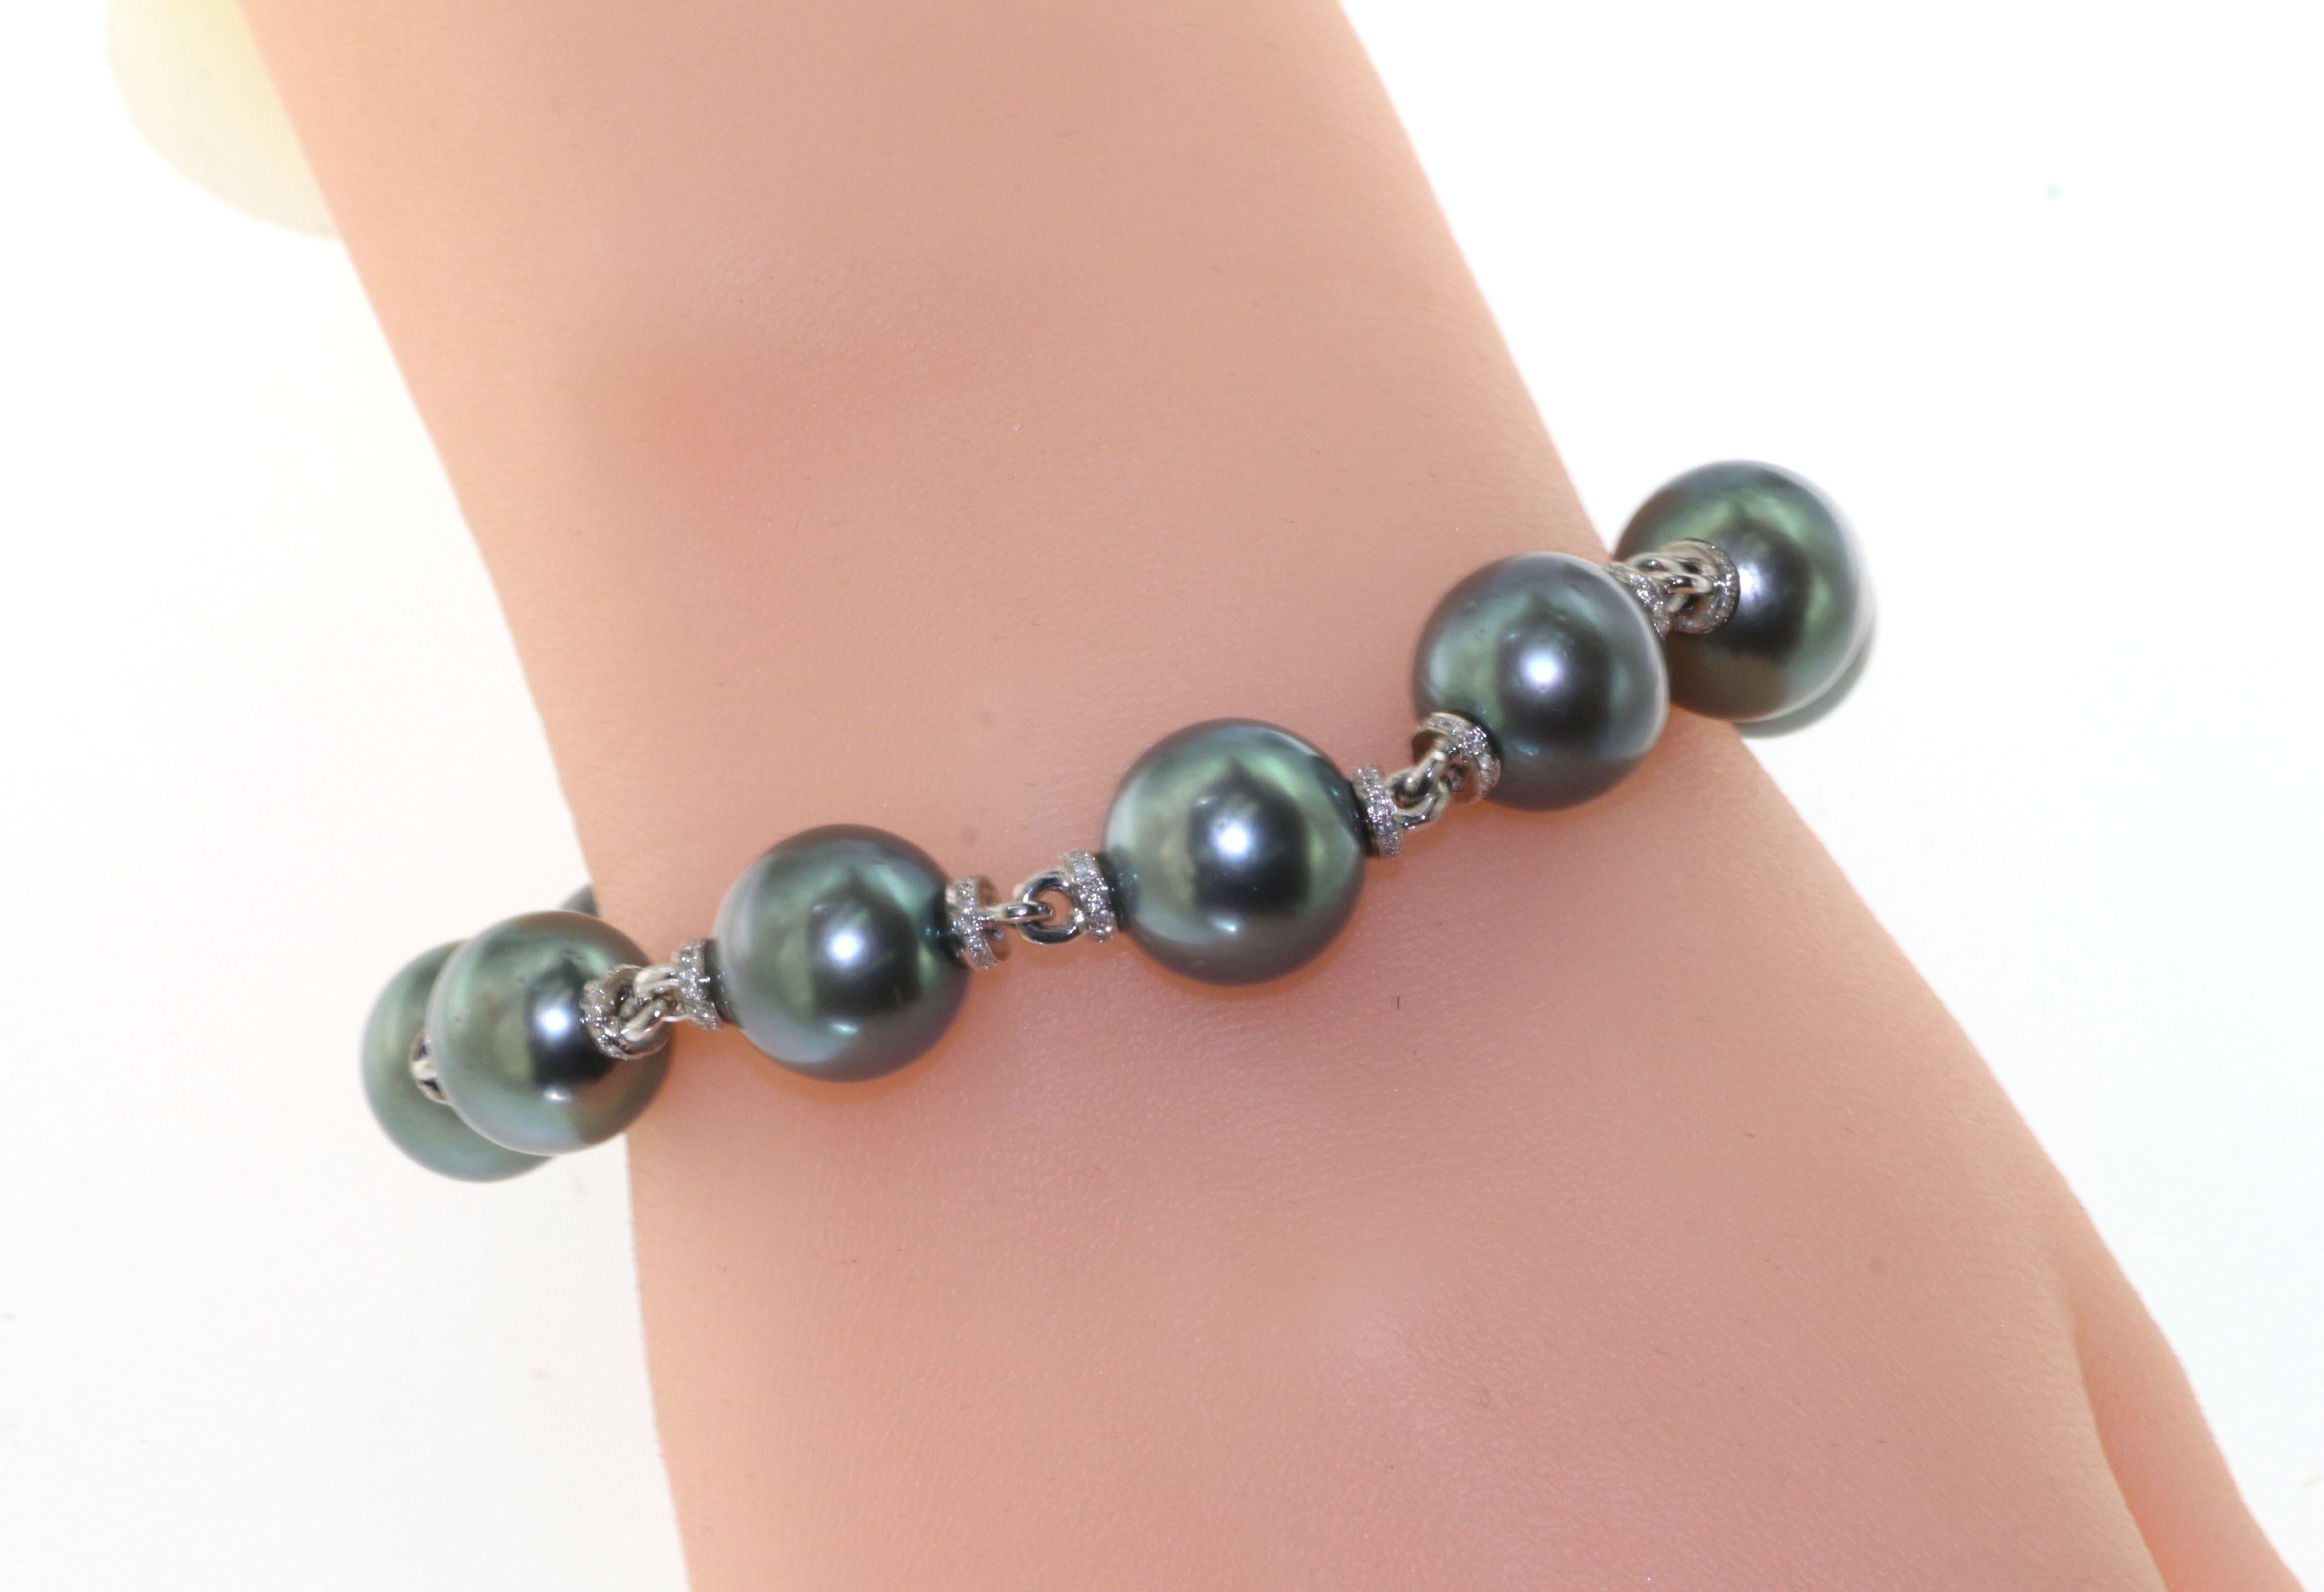 This unique custom made Large South Sea Tahitian 12.00-13.00 MM Pearl and diamond rondell bracelet length is 8.5 inch. A great piece for your special someone. This Tahitian pearl bracelet also have a matching necklace, please visit our storefront to